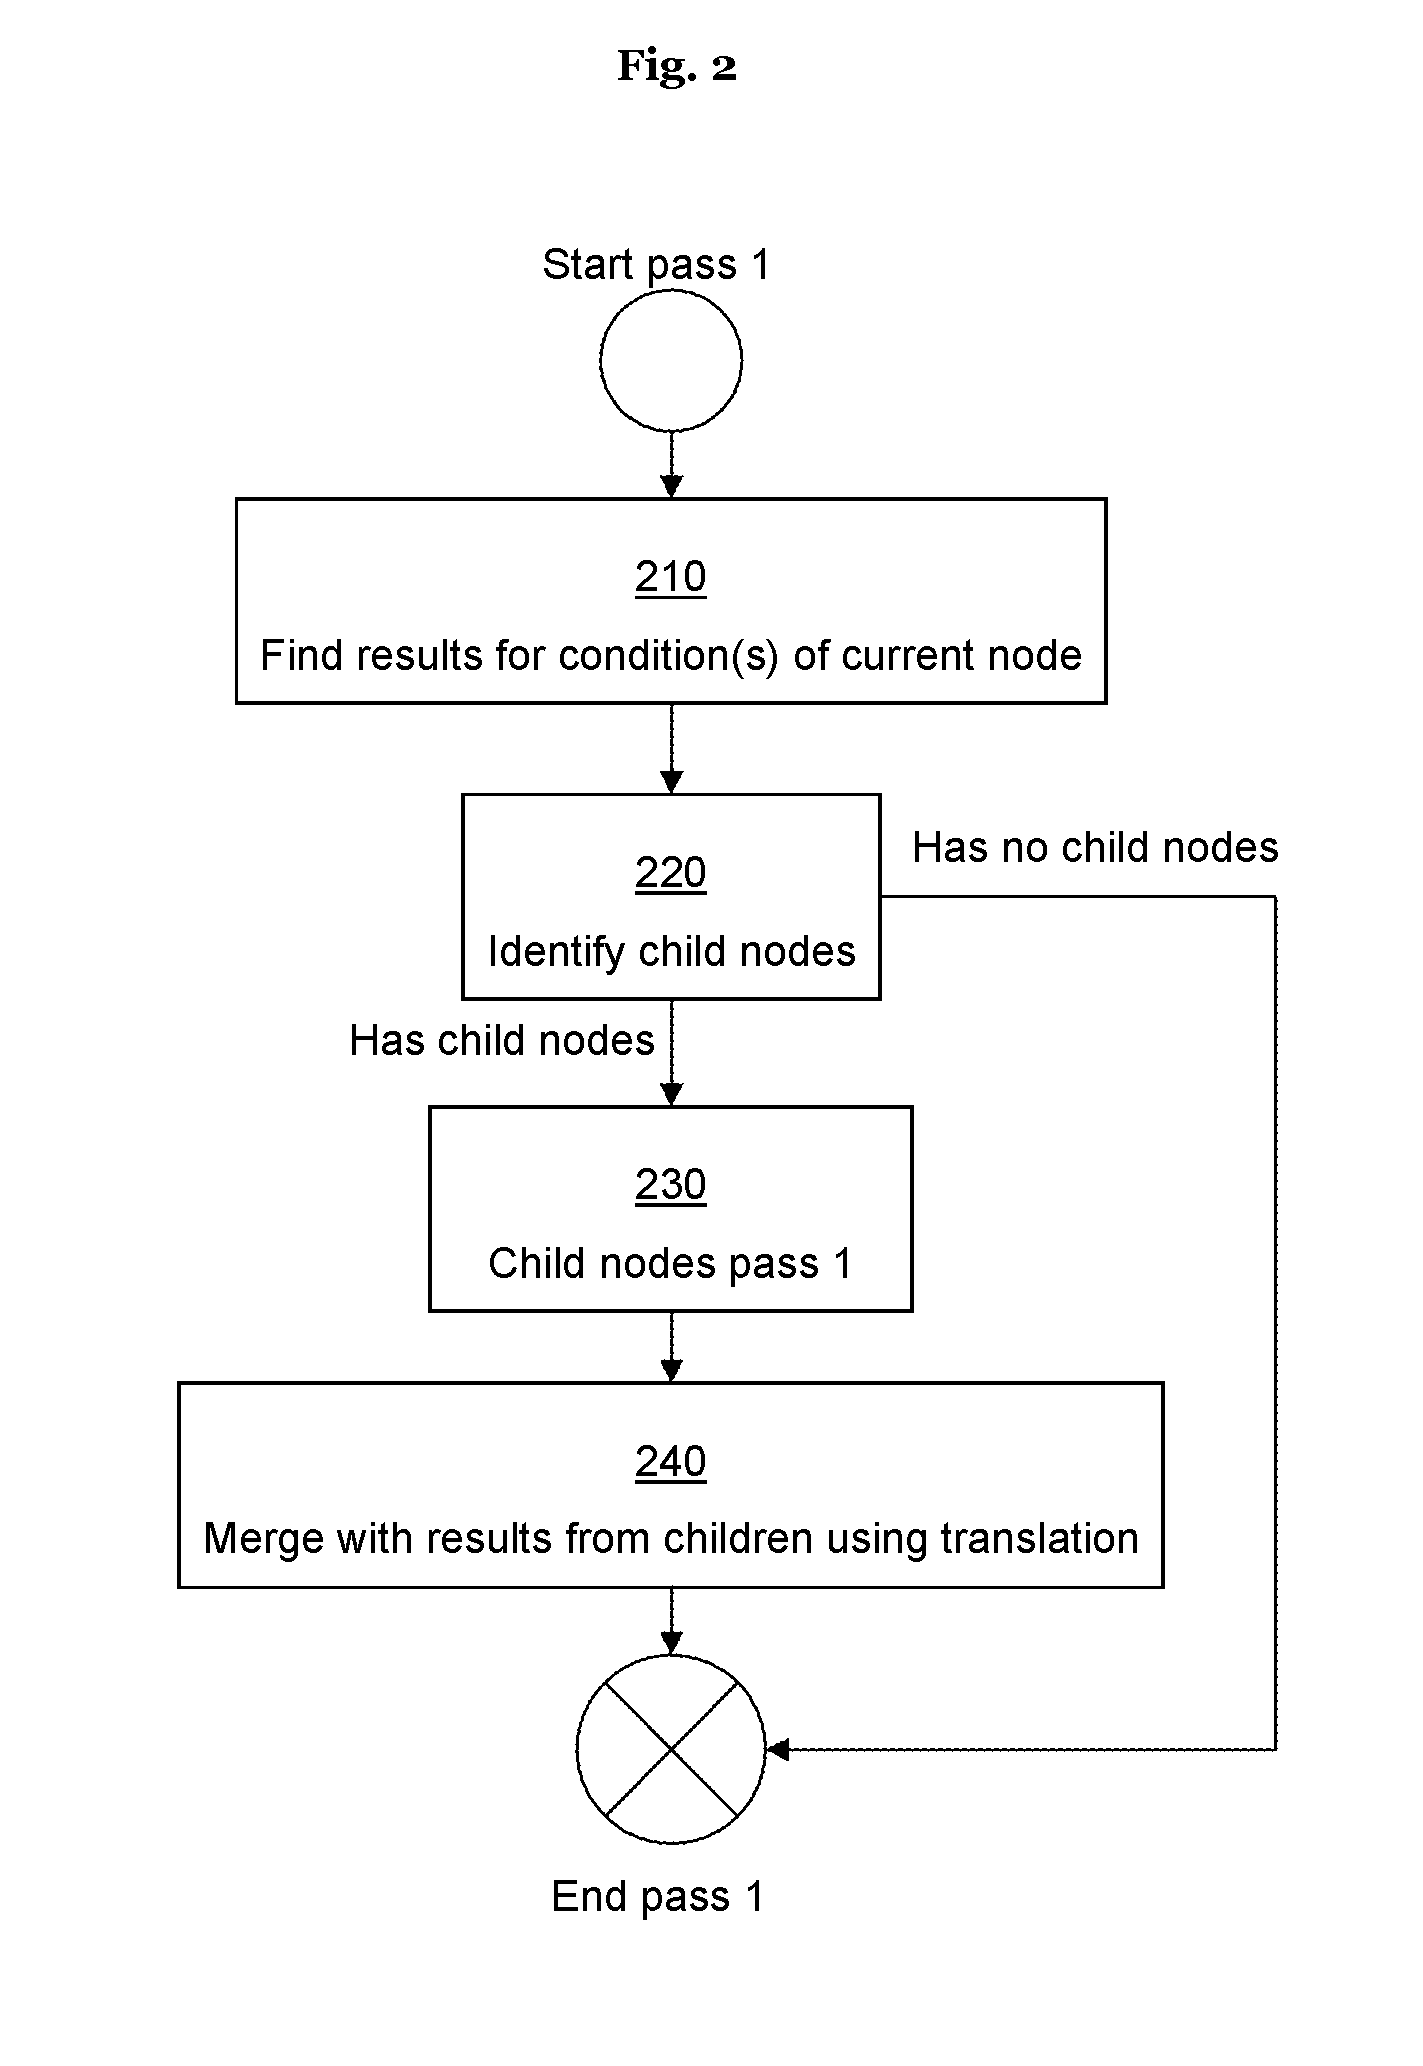 Method of processing relational queries in a database system and corresponding database system